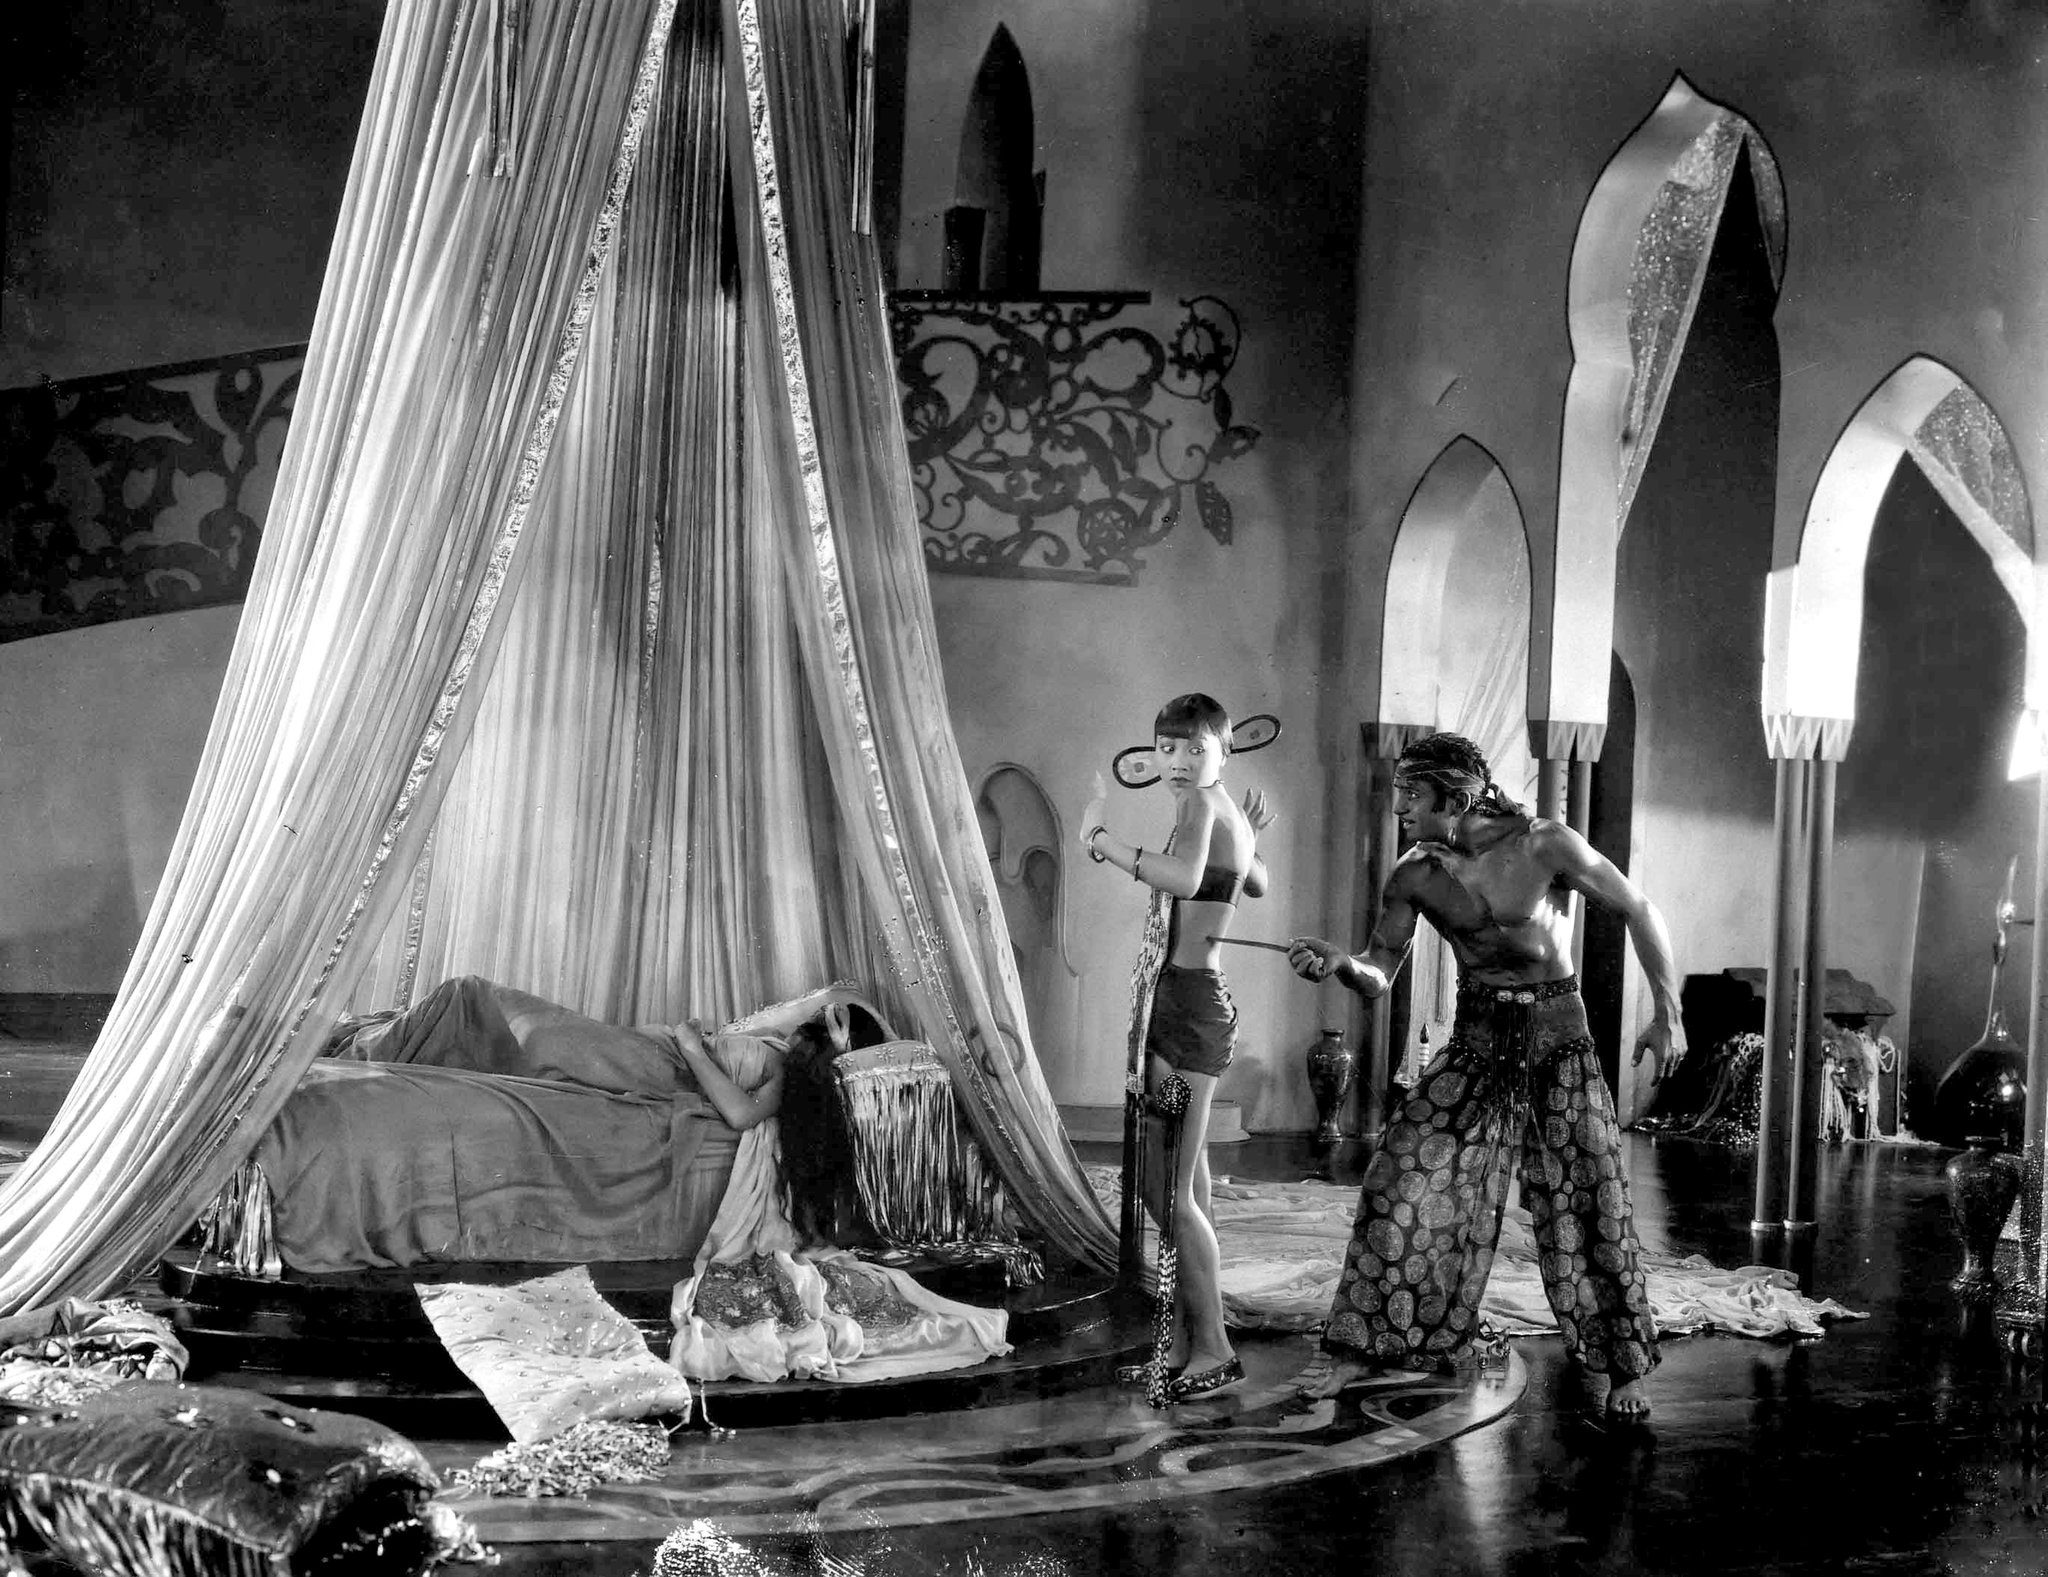 Douglas Fairbanks as Ahmed, the Thief of Bagdad threatening Anna May Wong as the Mongol Slave with Julanne Johnston as The Princess sleeping 1924 The Thief of Bagdad picture image